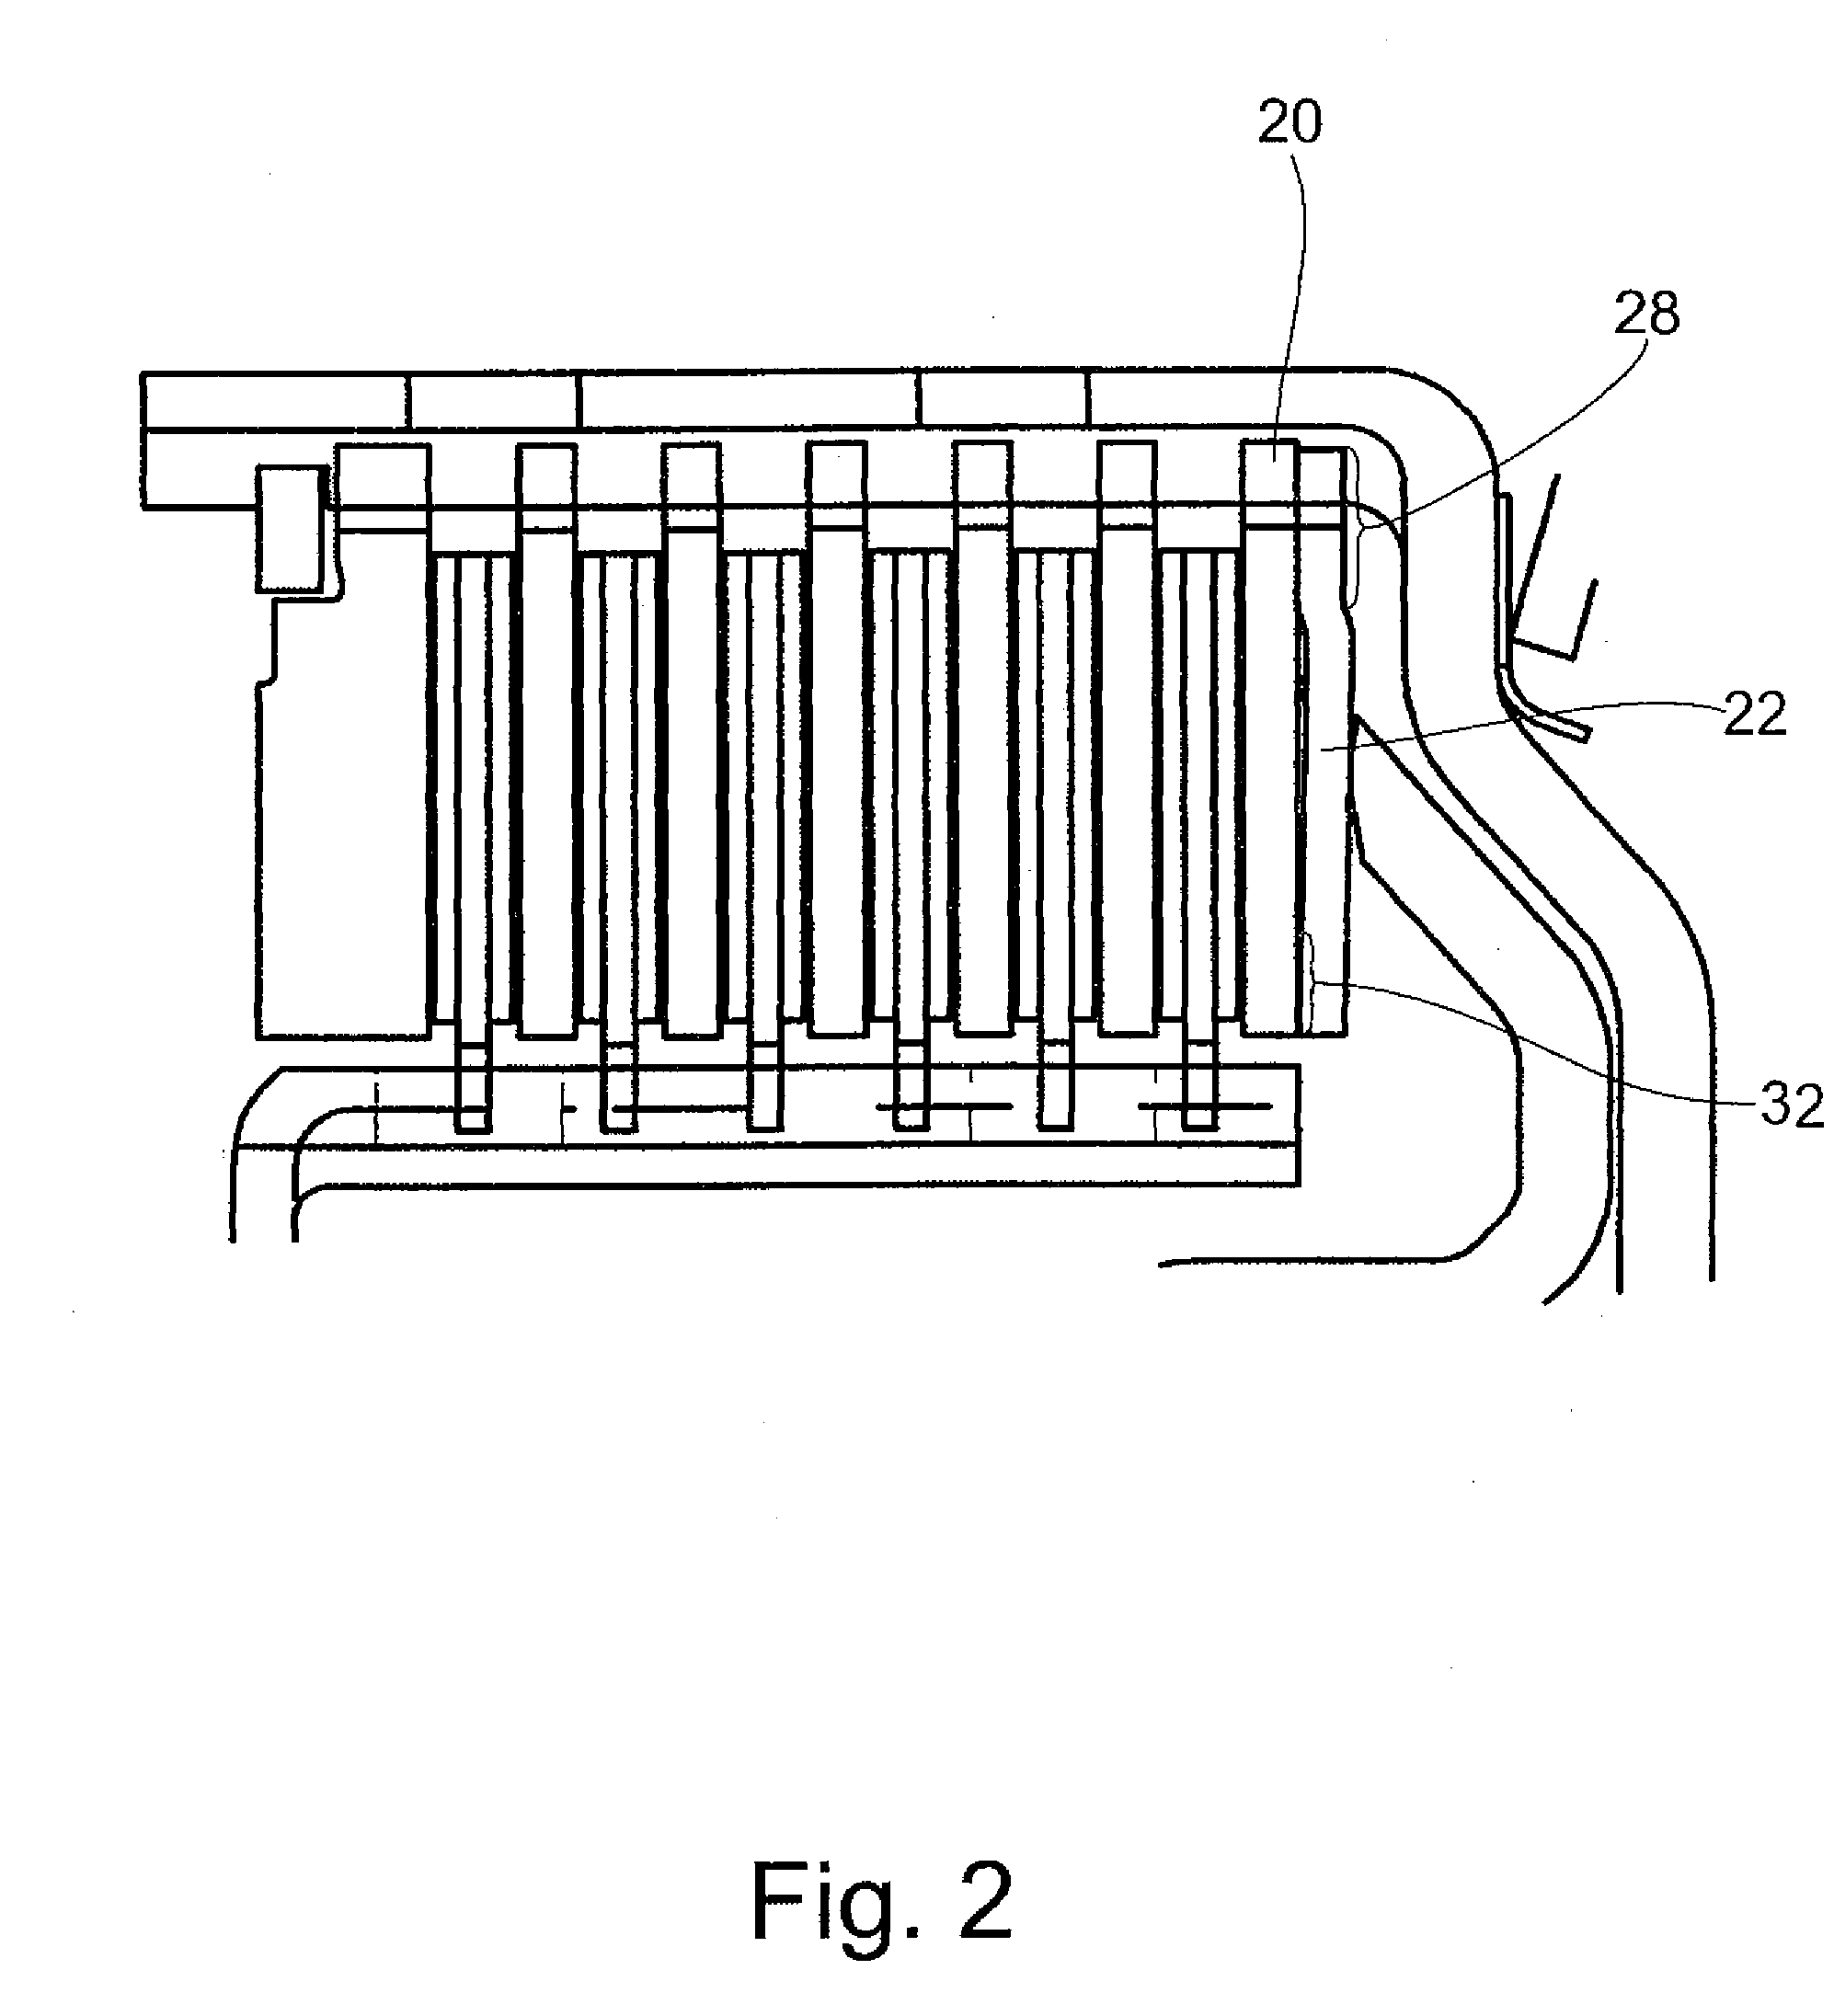 Multiple-disk clutch with resilient element